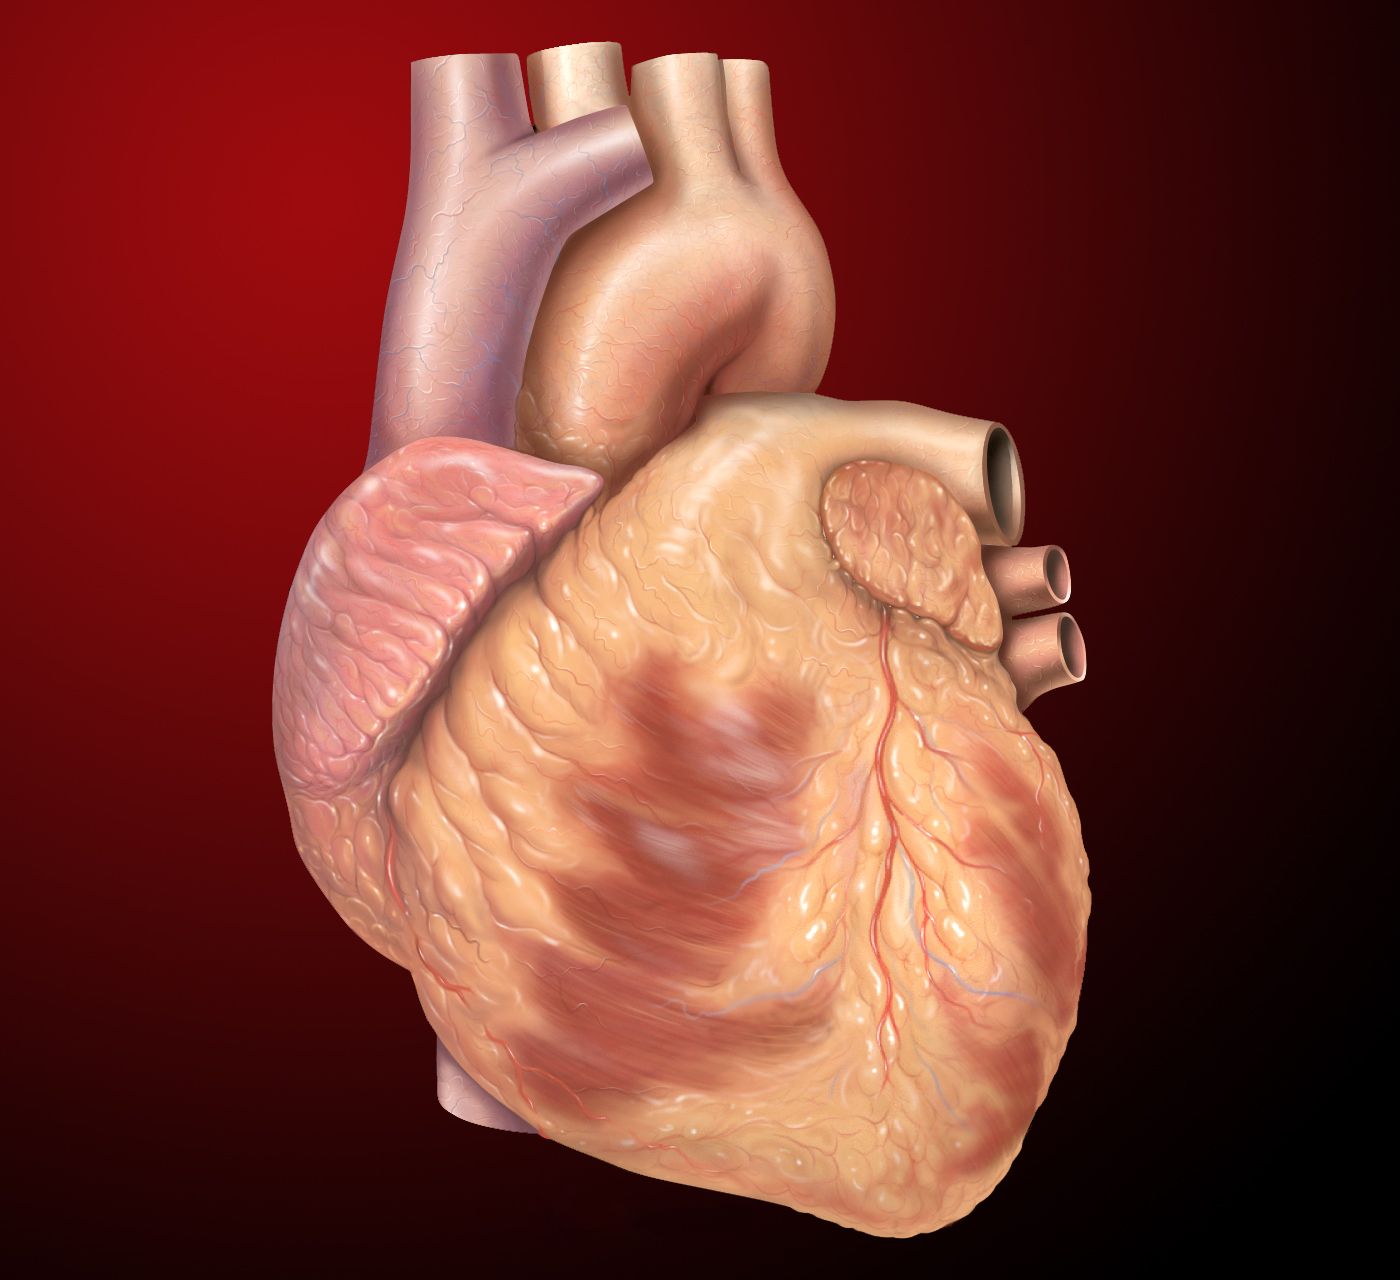 According to researchers, new technologies can be used to restore heart muscle